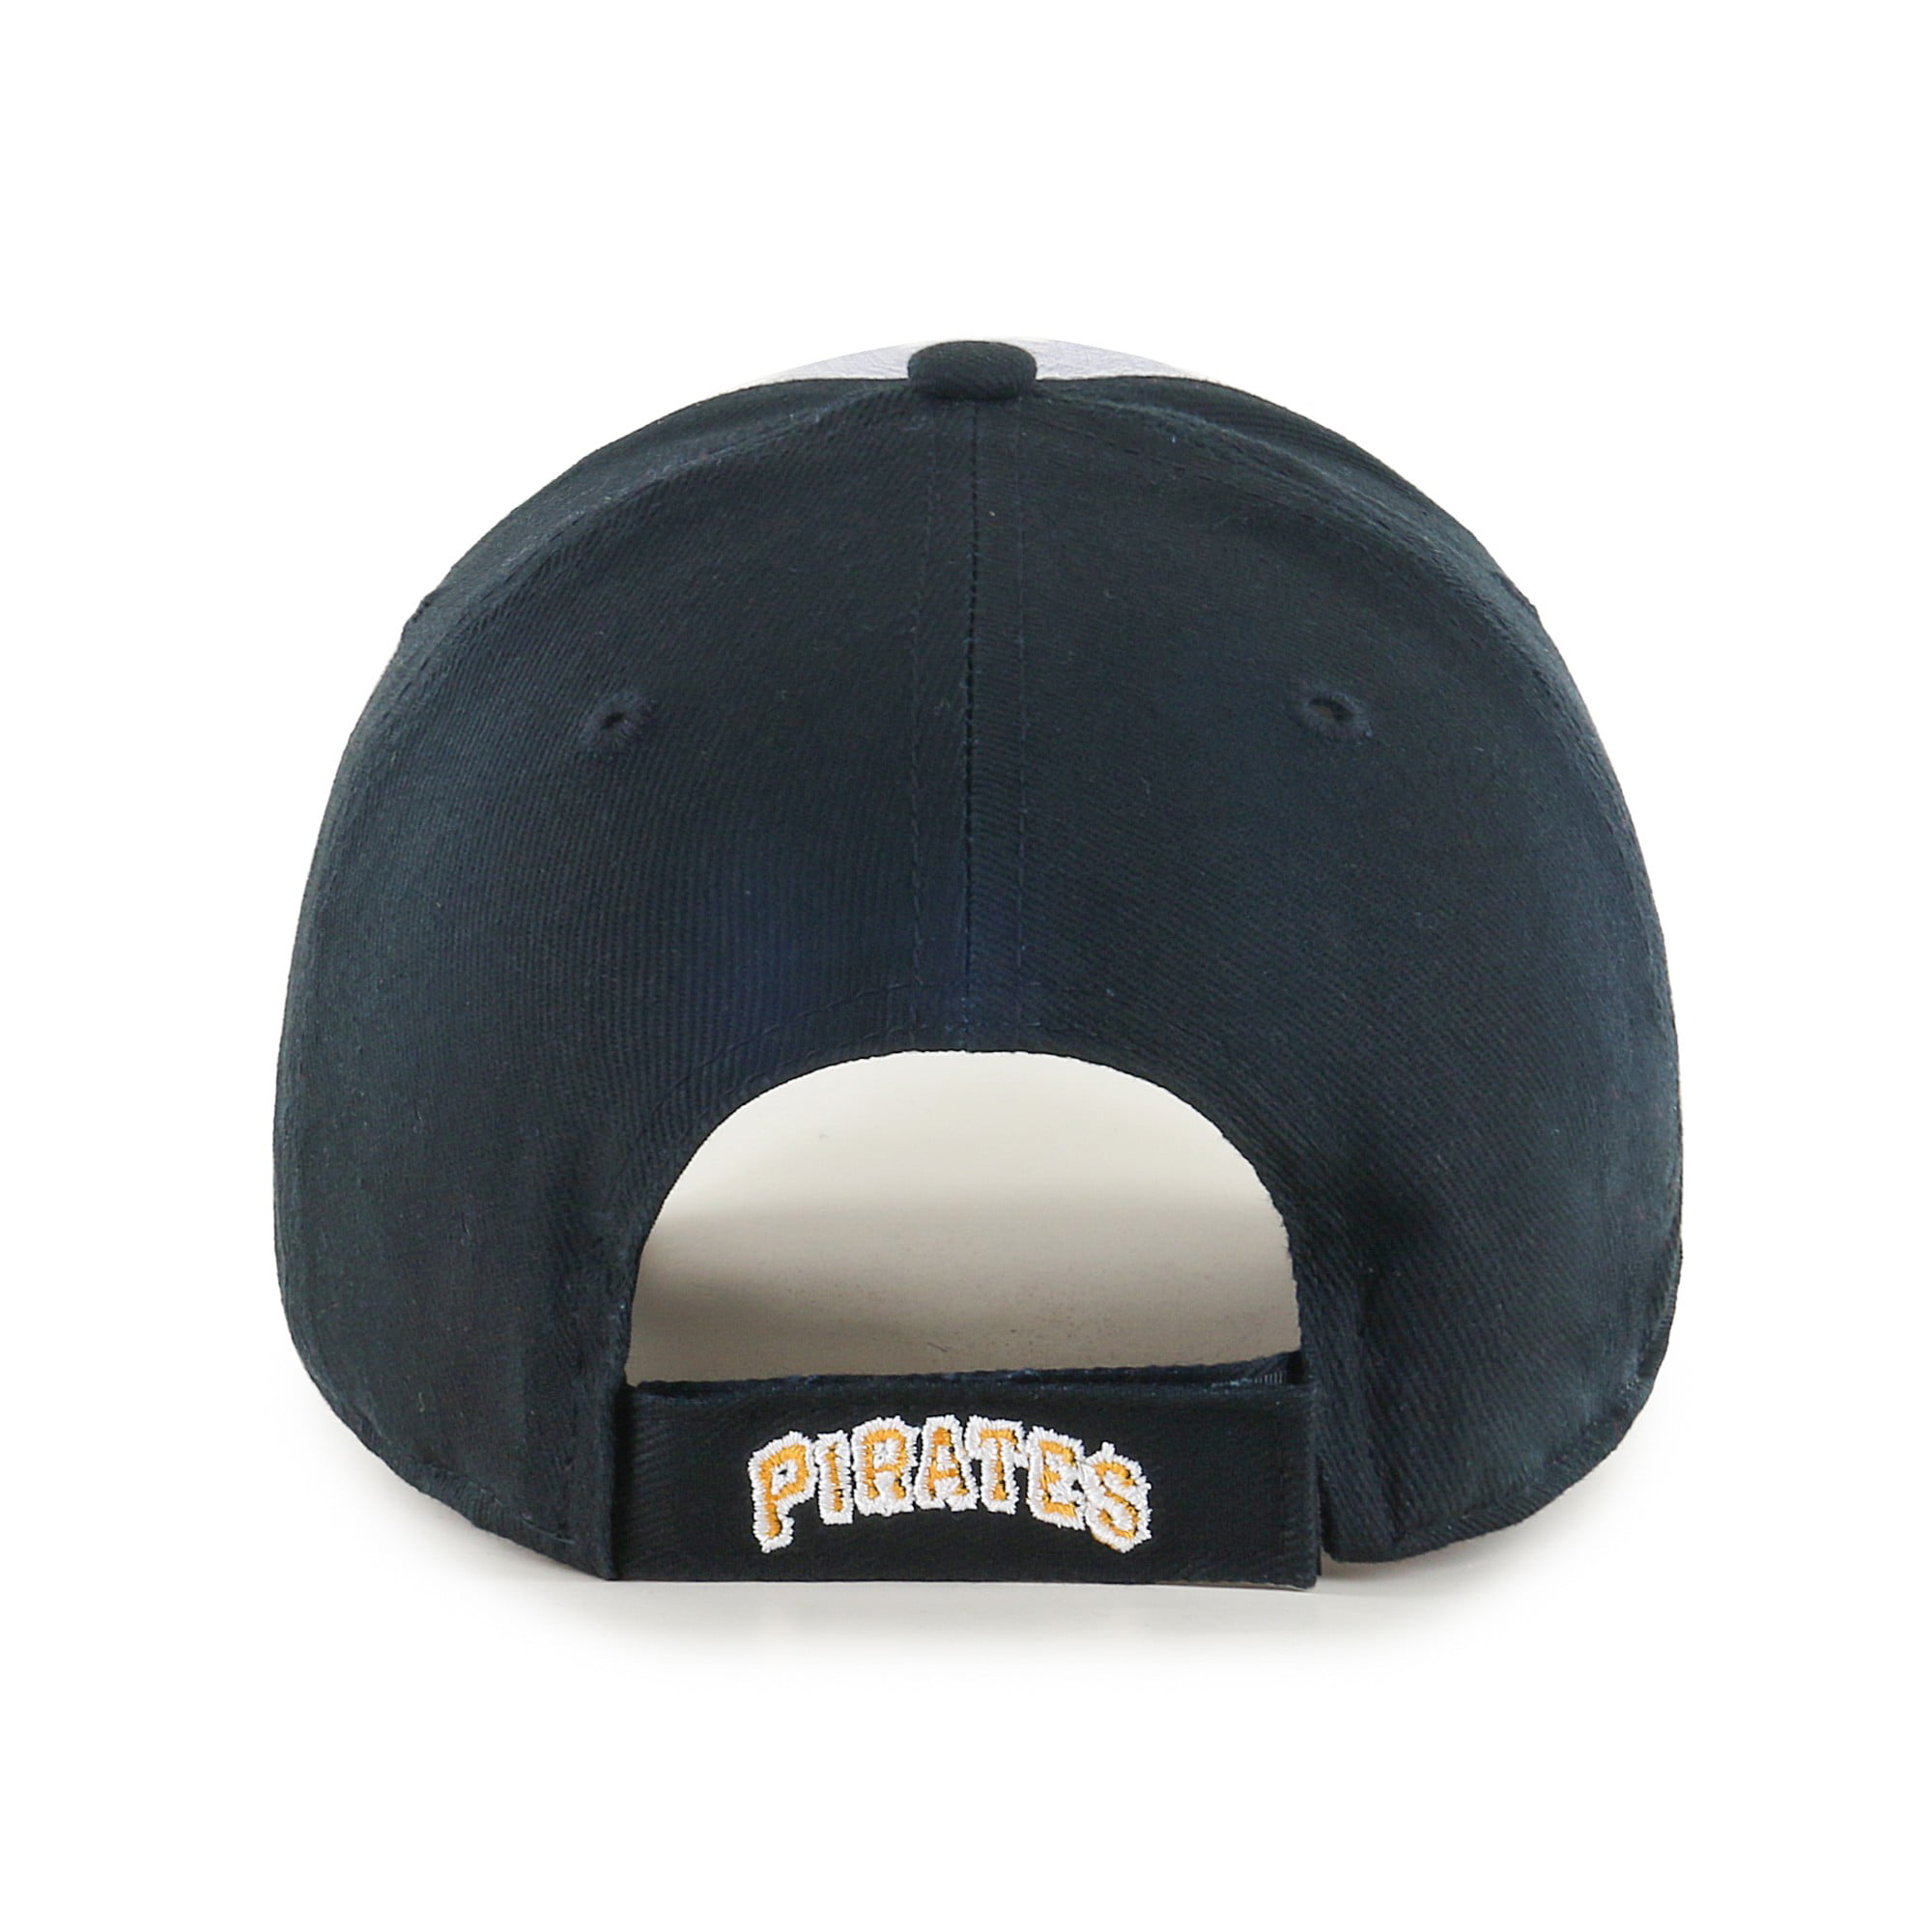 Pittsburgh Pirates '47 Brand Fan Favorite Adjustable Hat – The Hat